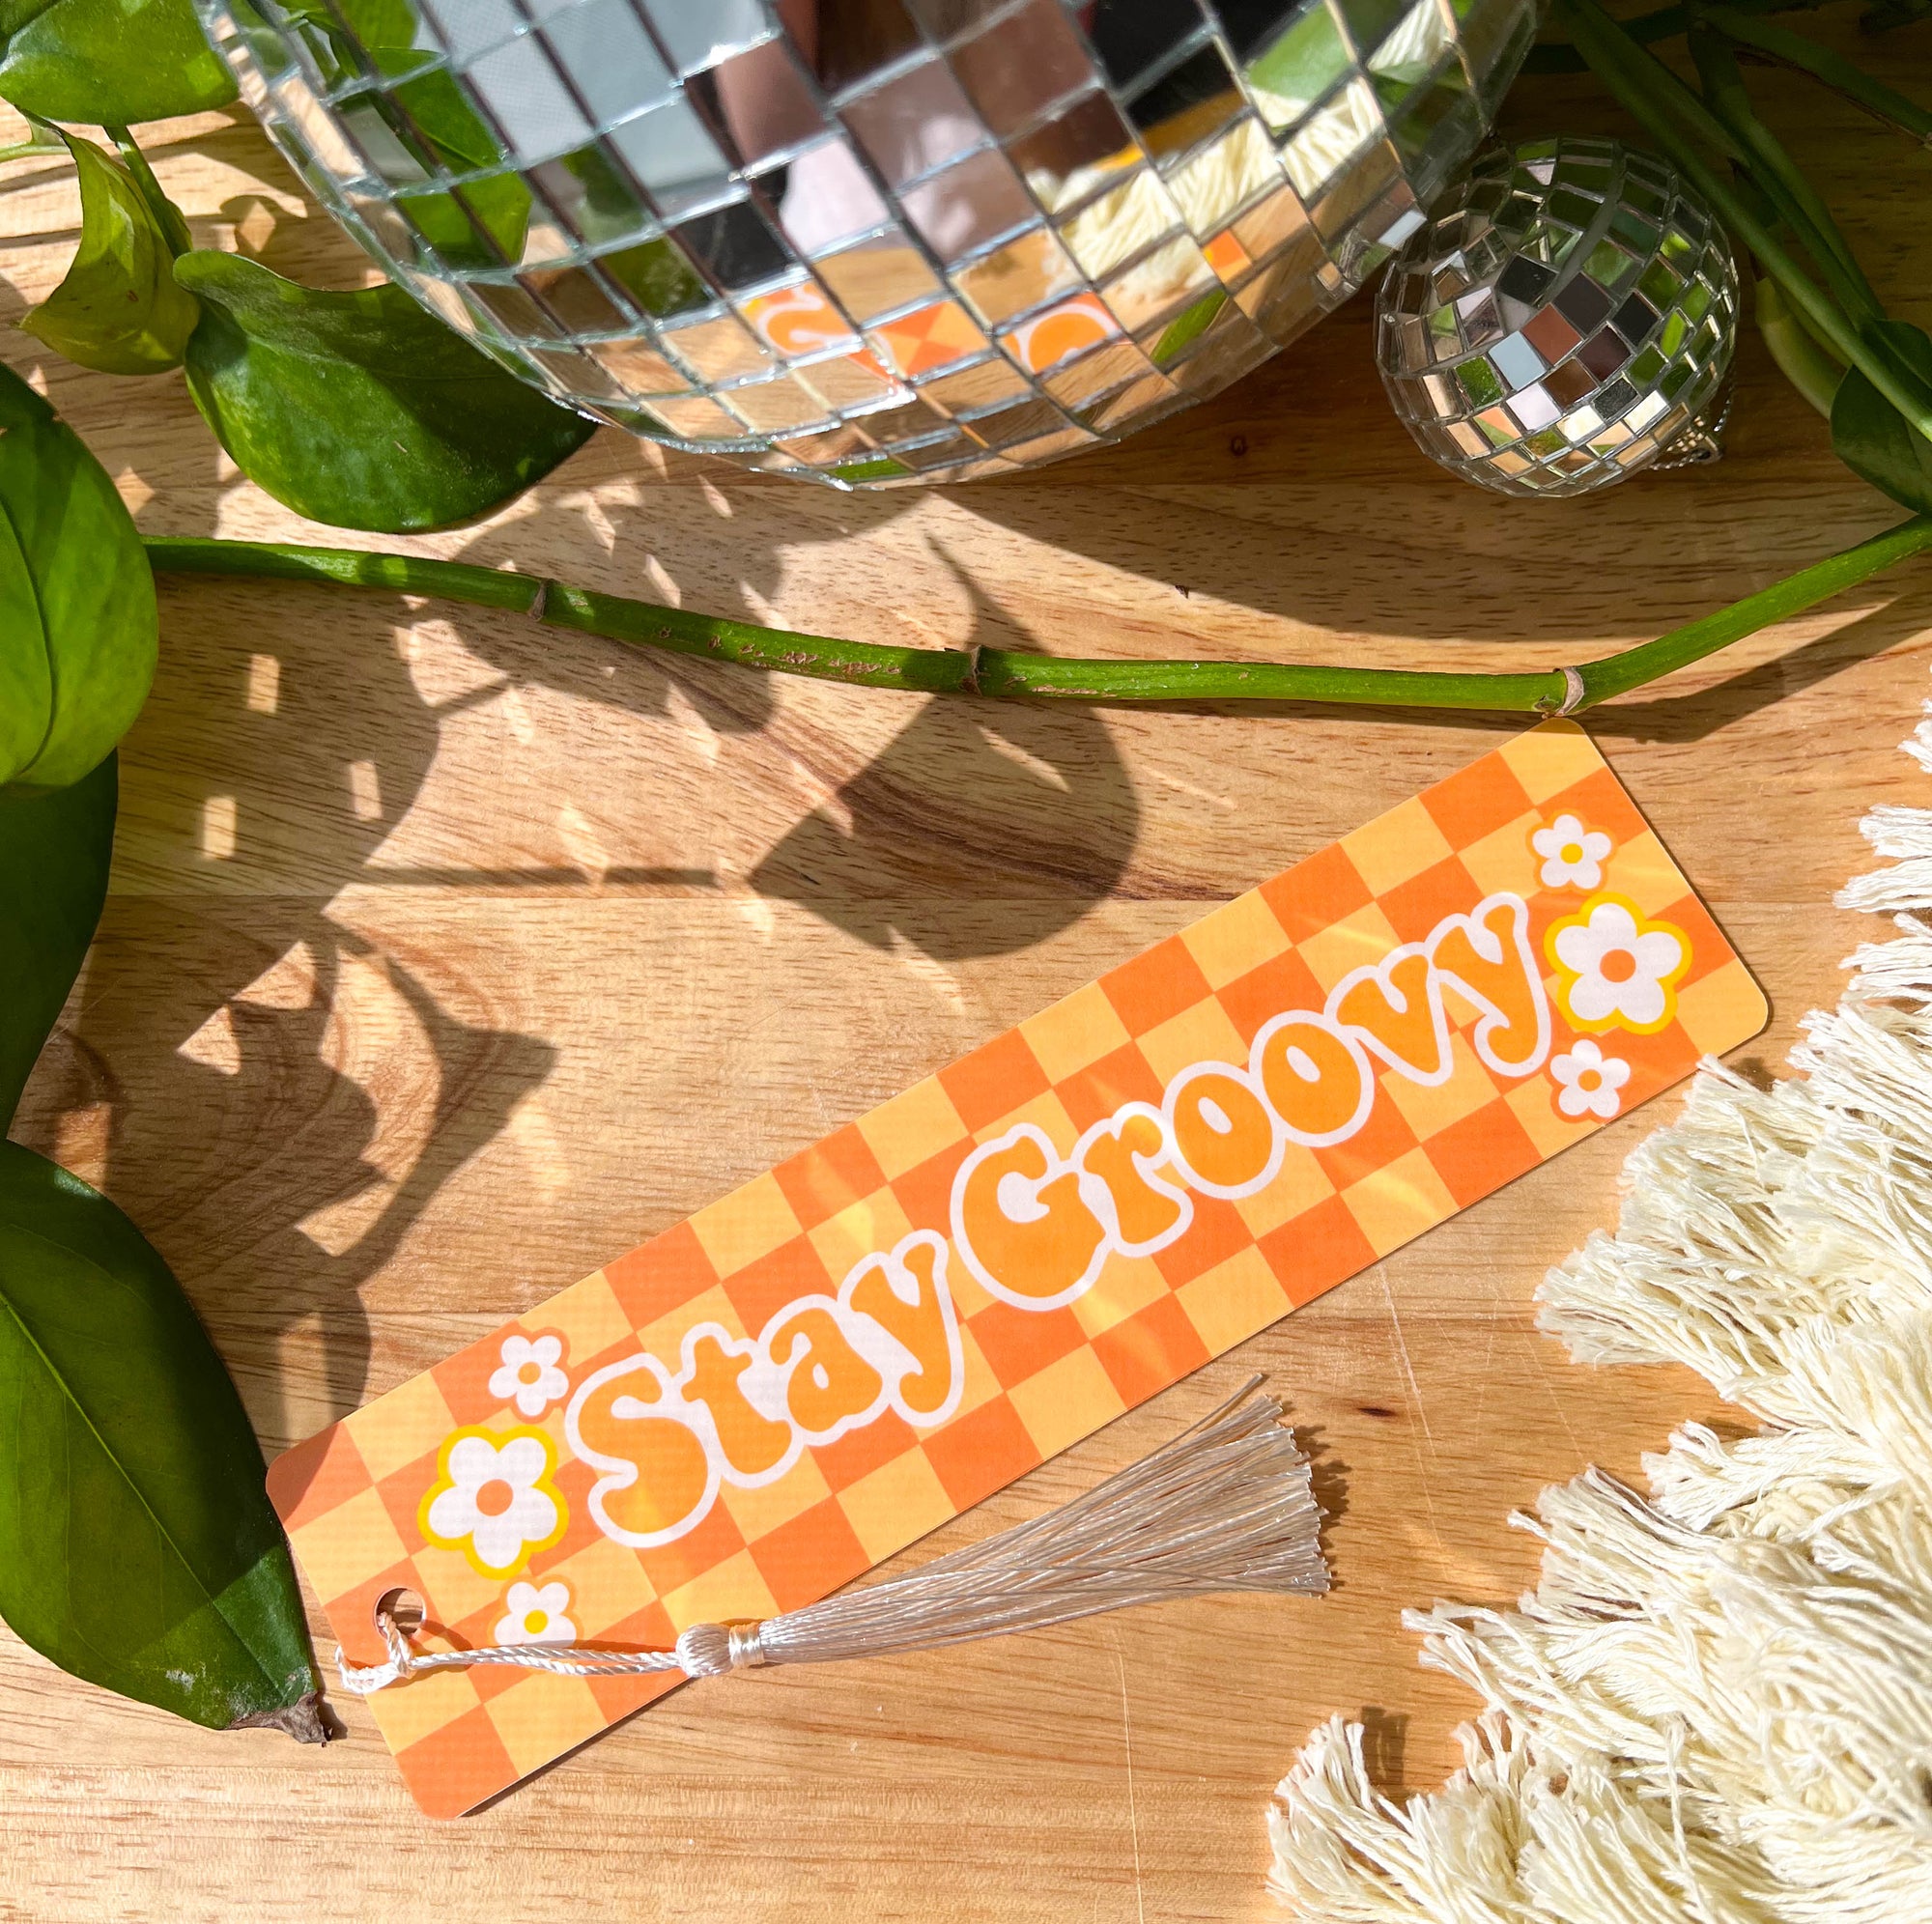 Stay Groovy Bookmark